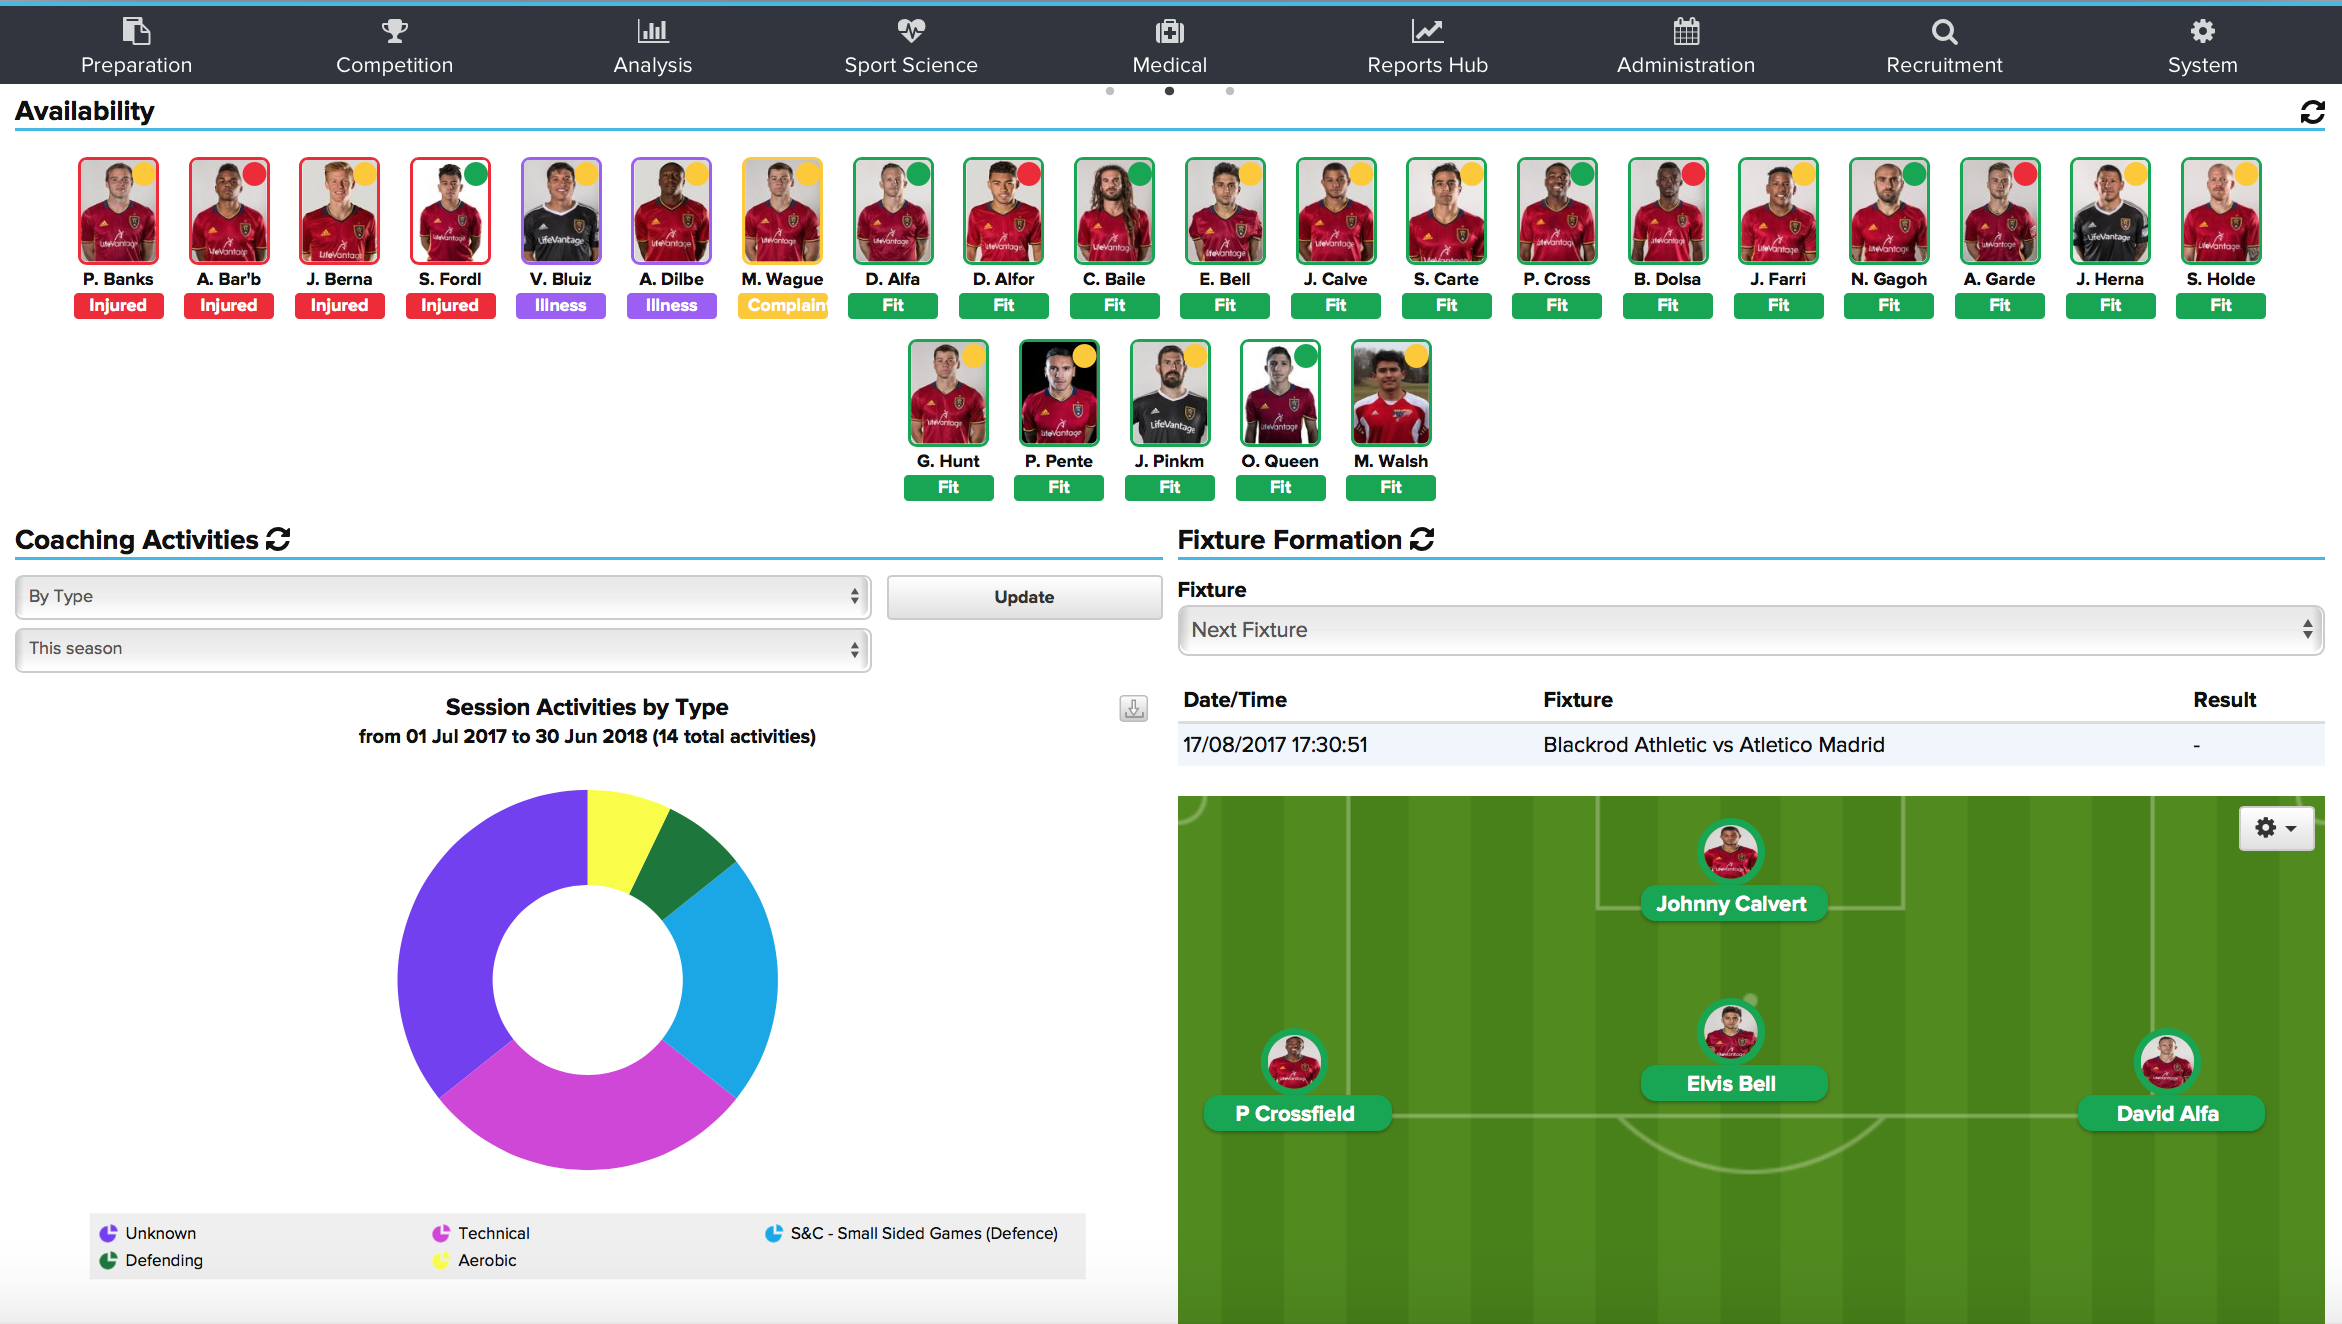 One tab allows managers to quickly check the availability of their players